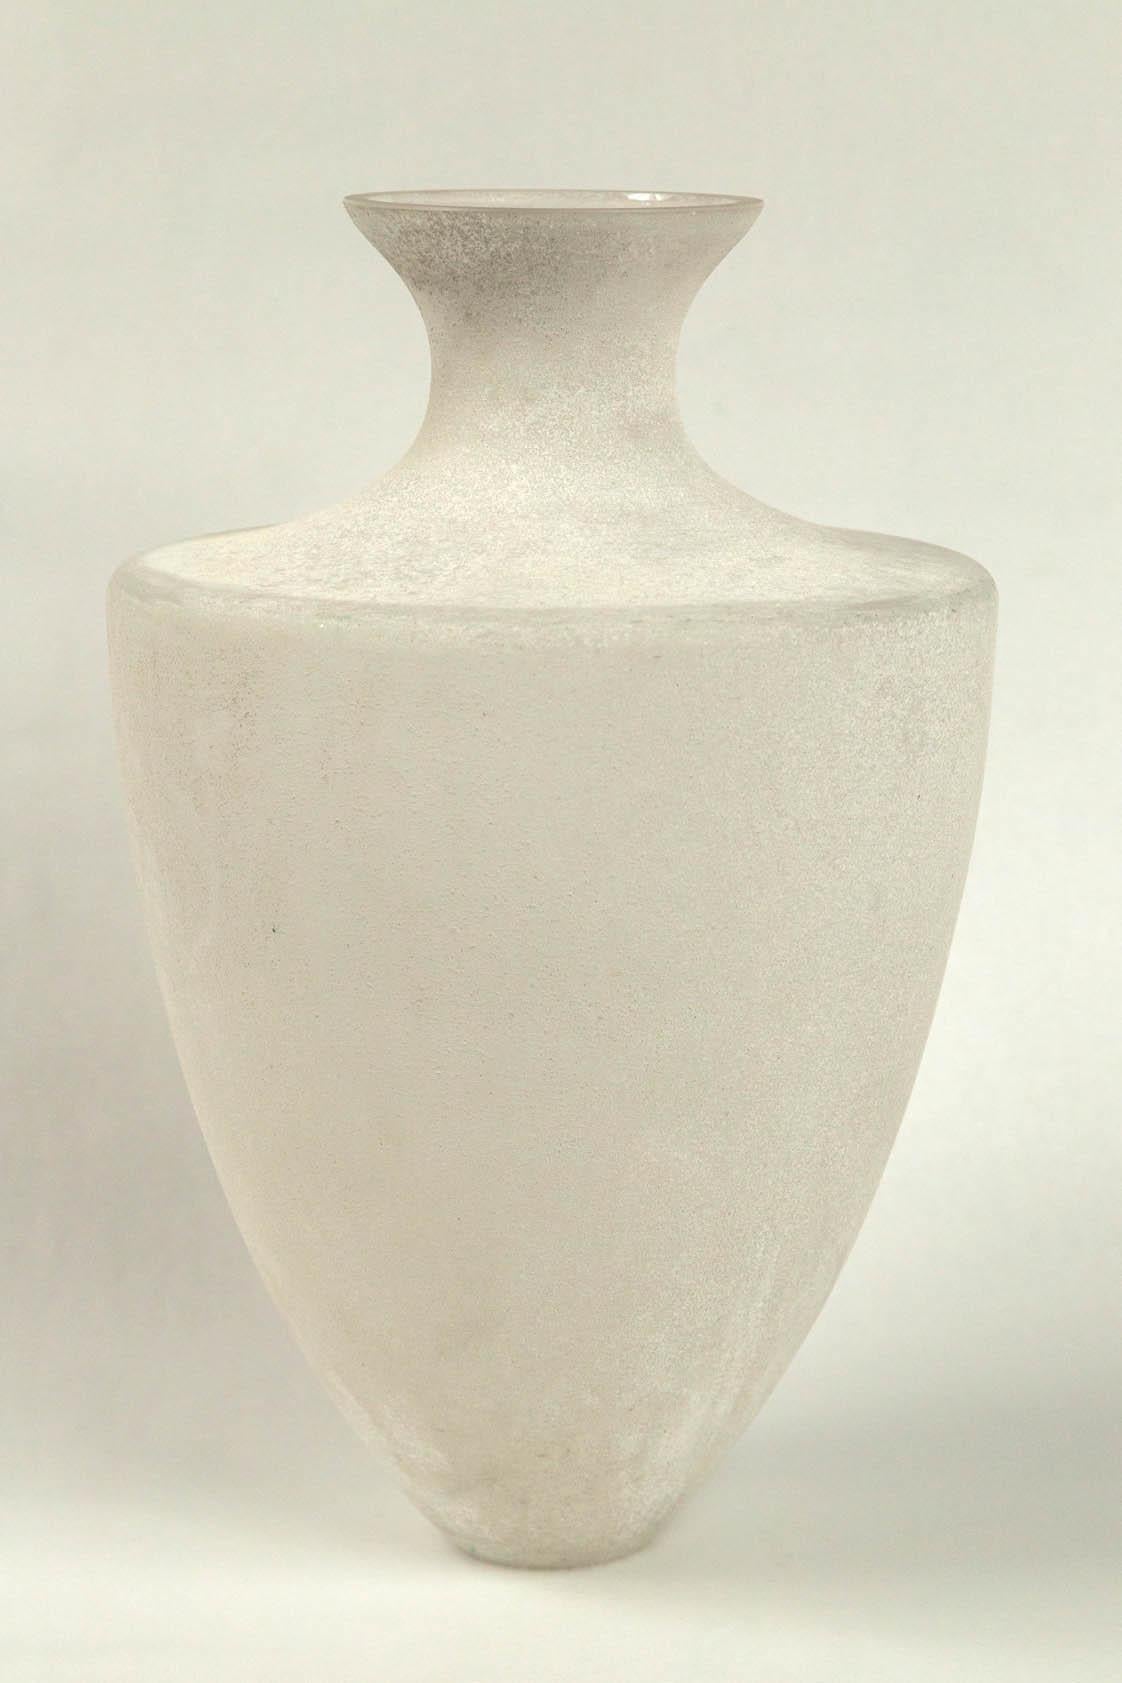 Scavo glass vase by Seguso, Murano, Italy, 20th century. A large neoclassic shape vase with Scavo (frosted) finish. Scavo glass was developed in Murano in the 1940s to simulate excavated antique Roman glass.